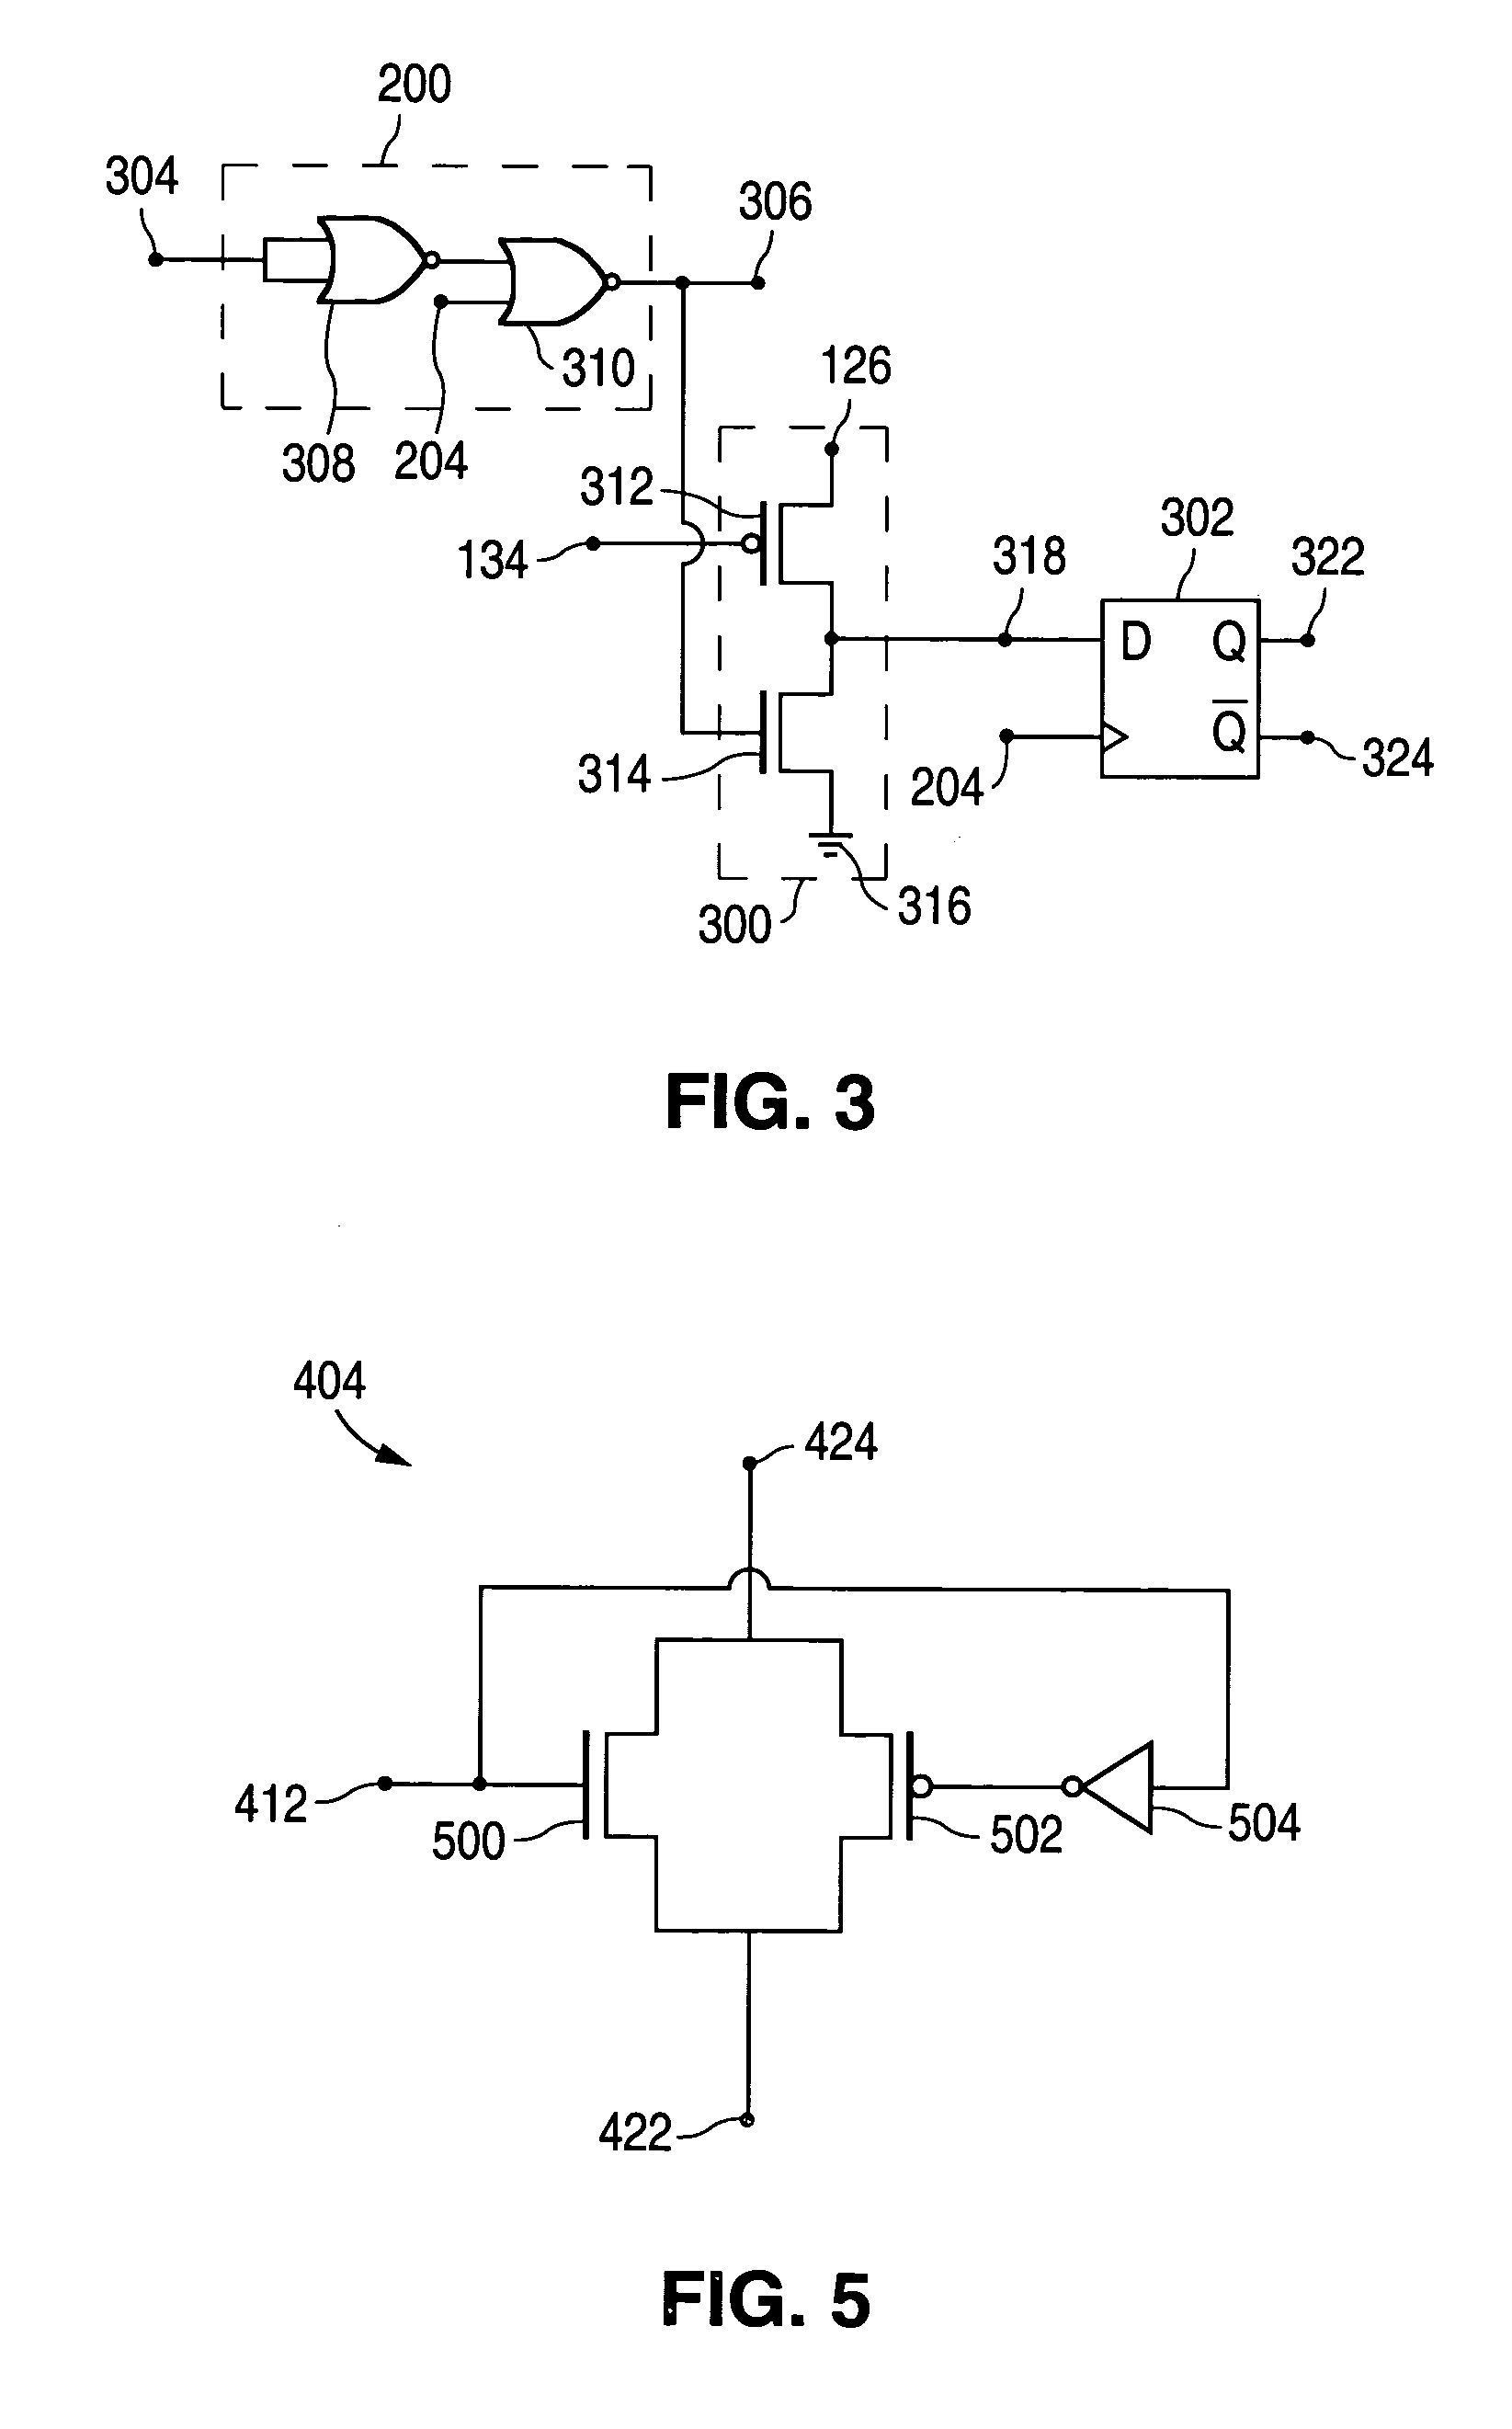 Method and system for providing self-calibration for adaptively adjusting a power supply voltage in a digital processing system